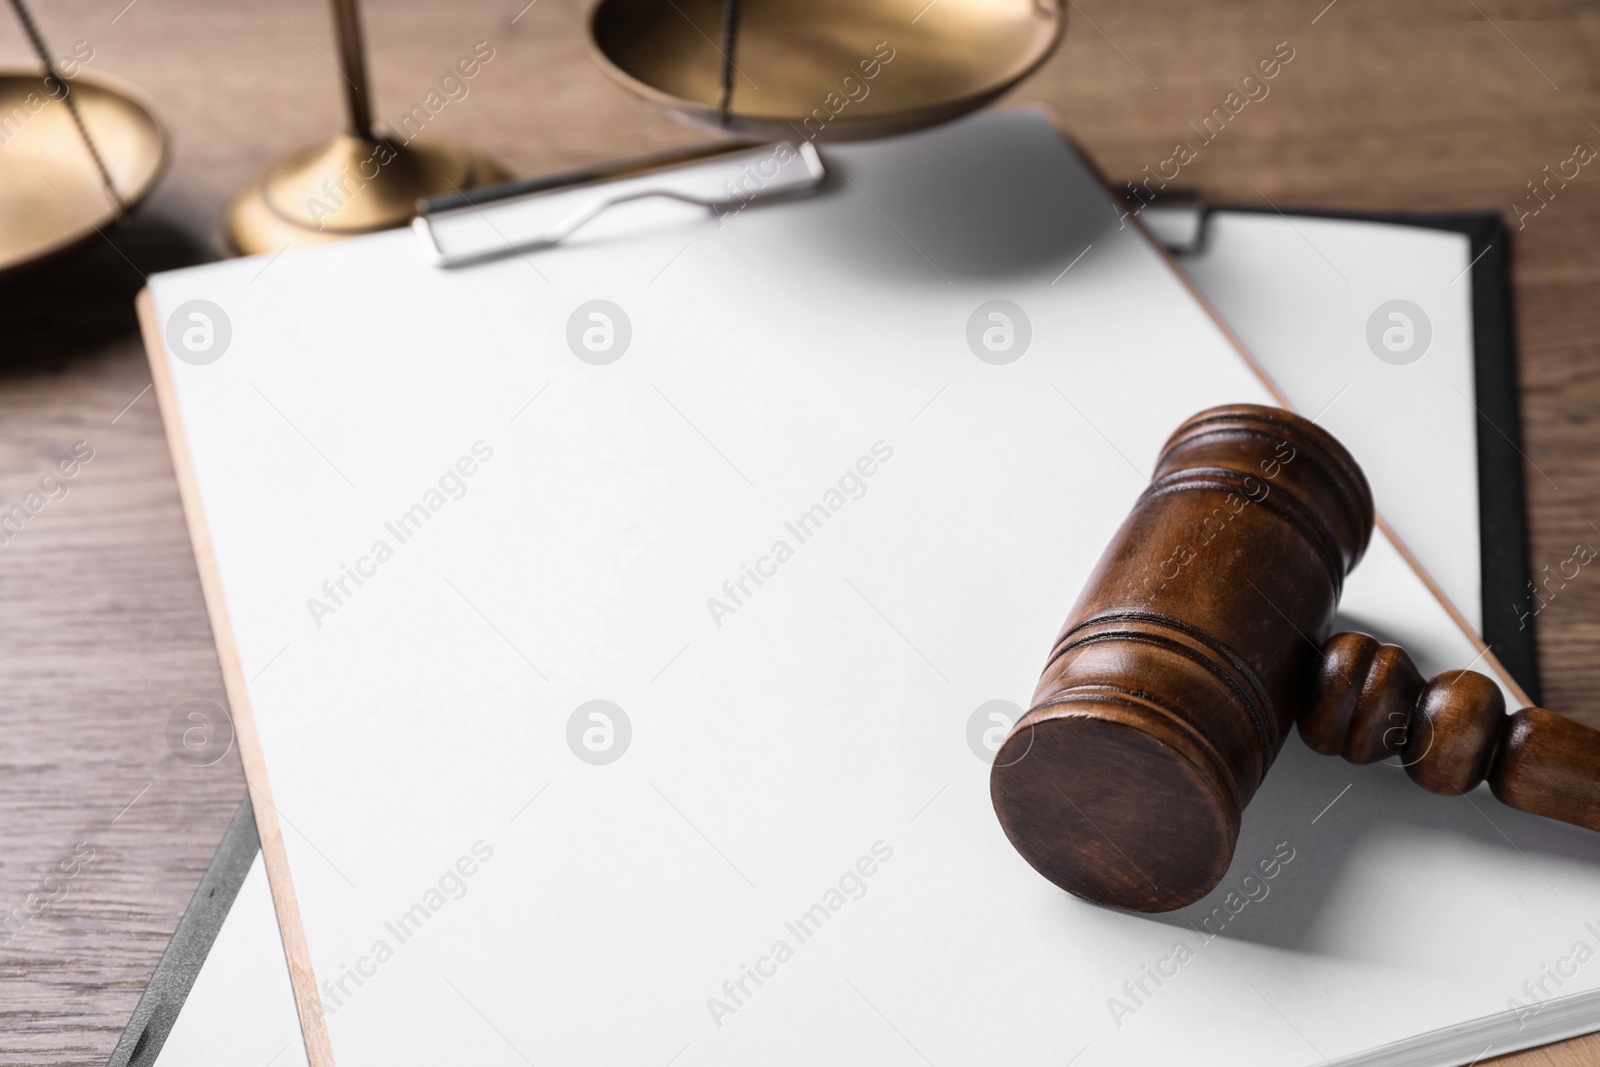 Photo of Clipboard with words DOMESTIC VIOLENCE and gavel on wooden table